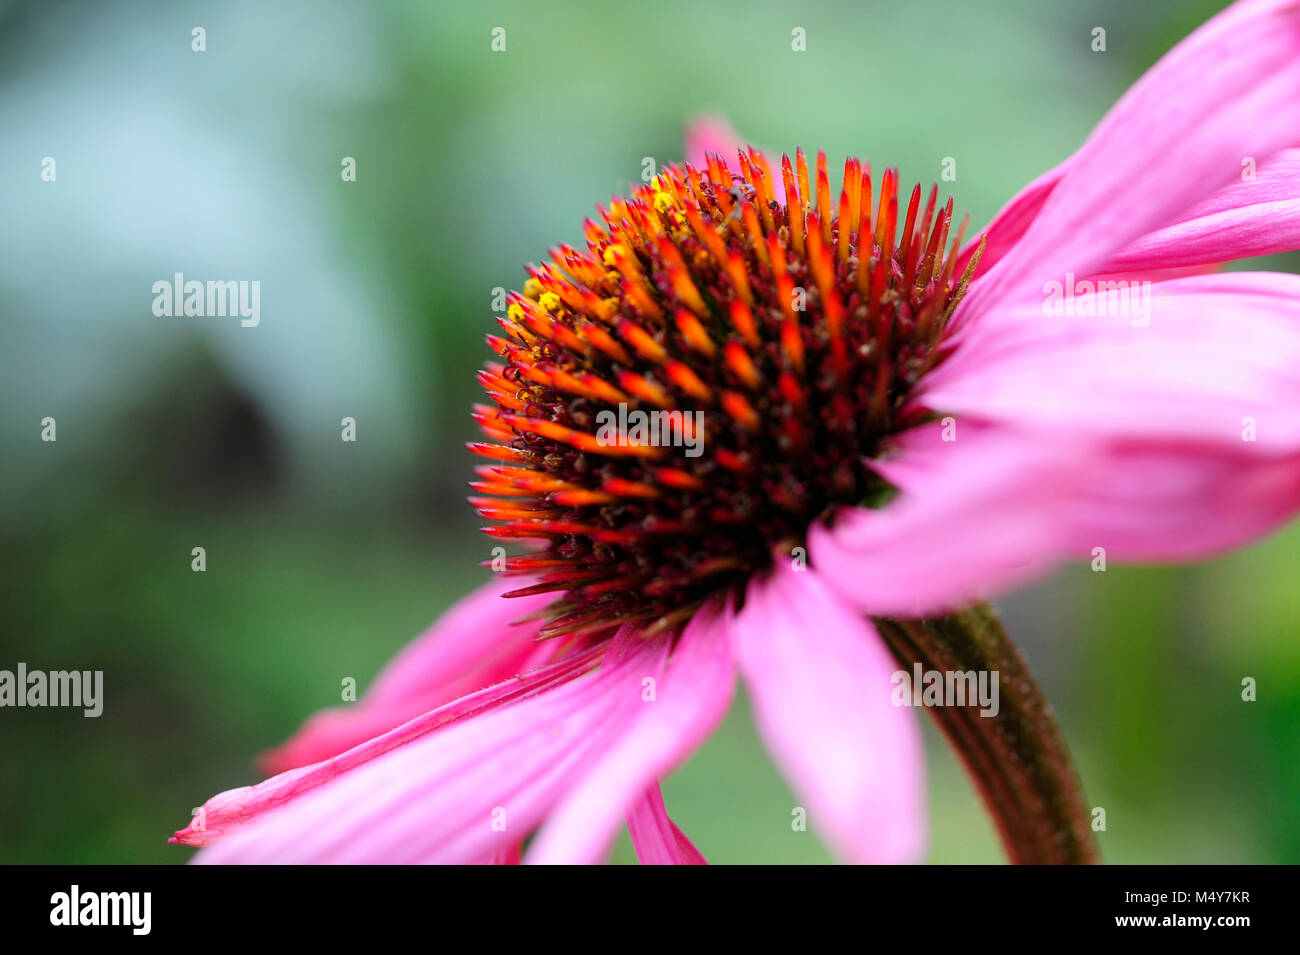 Echinacea, commonly called coneflowers, is a genus of herbaceous flowering plants in the daisy family. Stock Photo